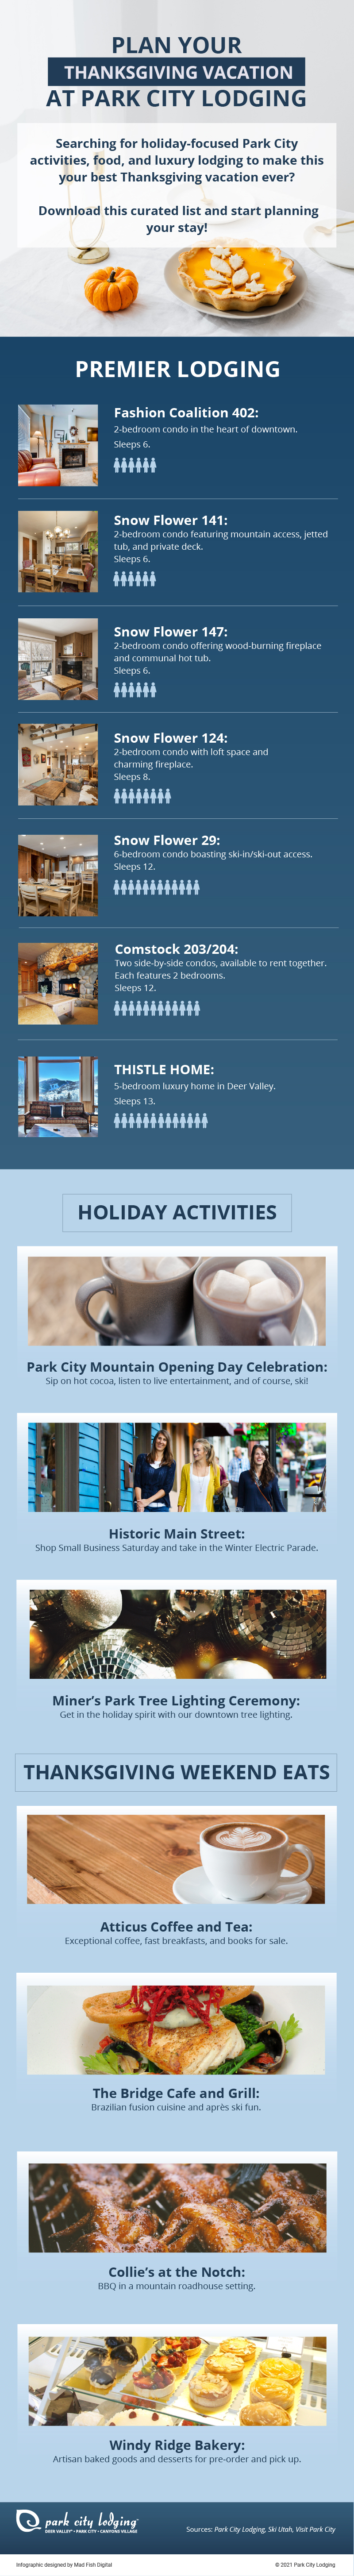 Infographic to help plan a Thanksgiving vacation in Park City.